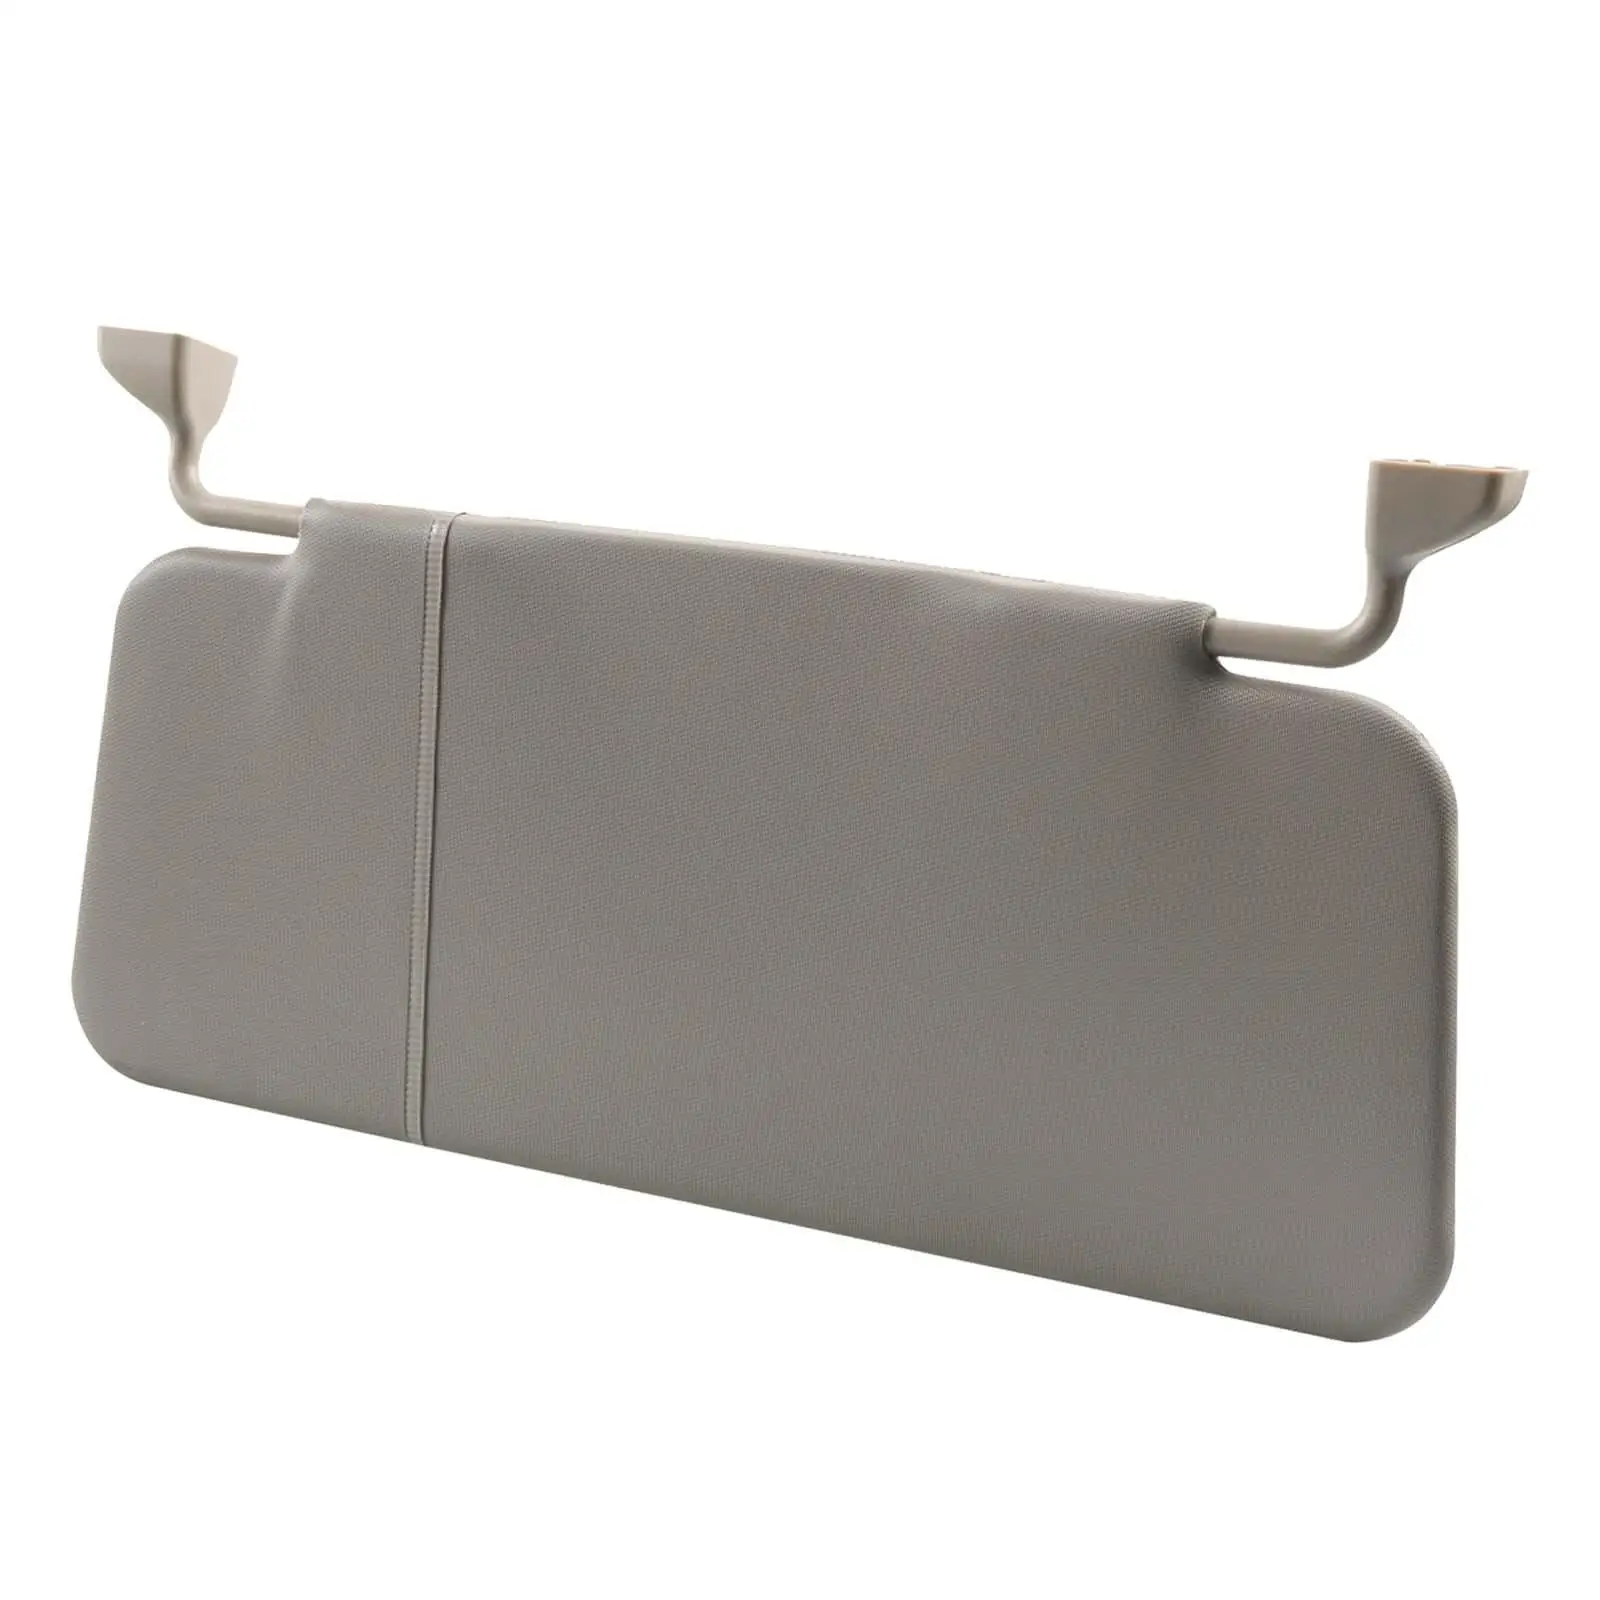 Sun Visor Shield Universal Sunproof Plate Grey Replaces for Construction